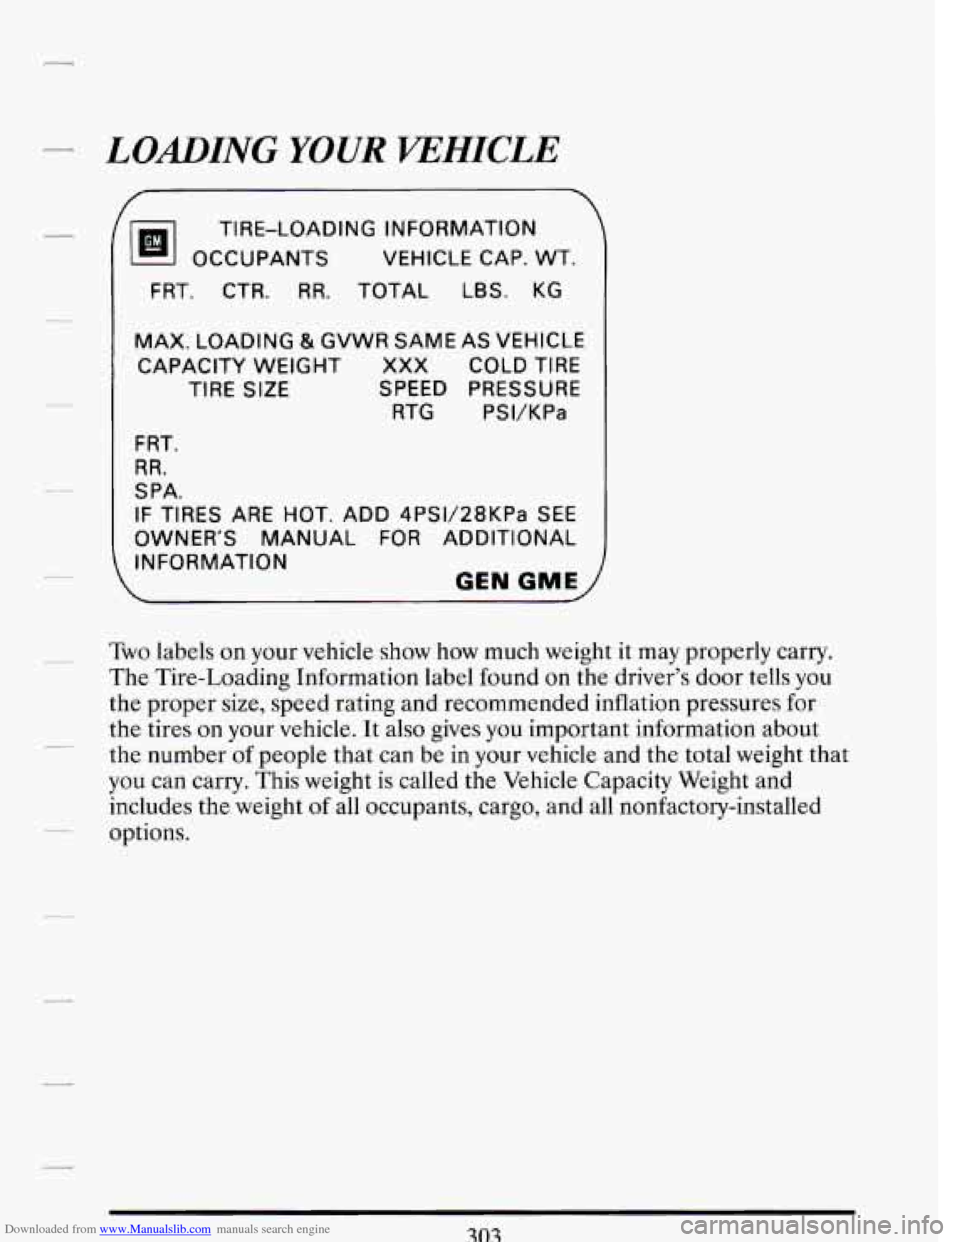 CADILLAC DEVILLE 1993 7.G Owners Manual Downloaded from www.Manualslib.com manuals search engine - LOADING YOUR VEHICLE 
TIRE-LOADING  INFORMATION 
/ OCCUPANTS  VEHICLE  CAP. WT. 
FRT. CTR. RR. TOTAL LBS. KG 
MAX.  LOADING 
& GVWR  SAME  AS